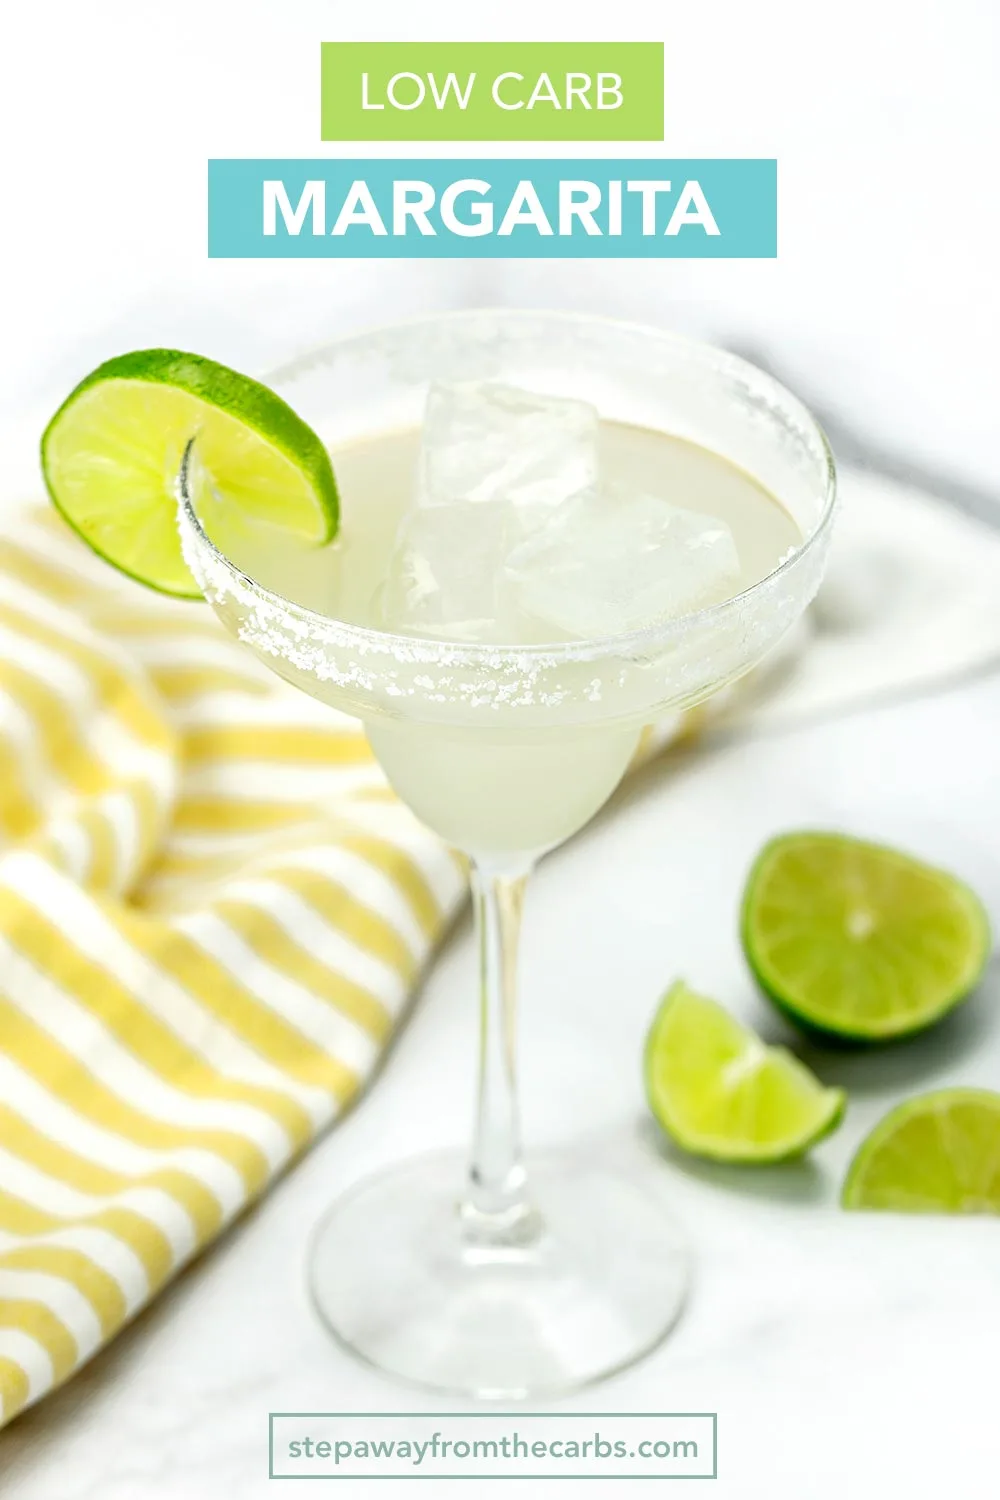 Low Carb Margarita with video tutorial